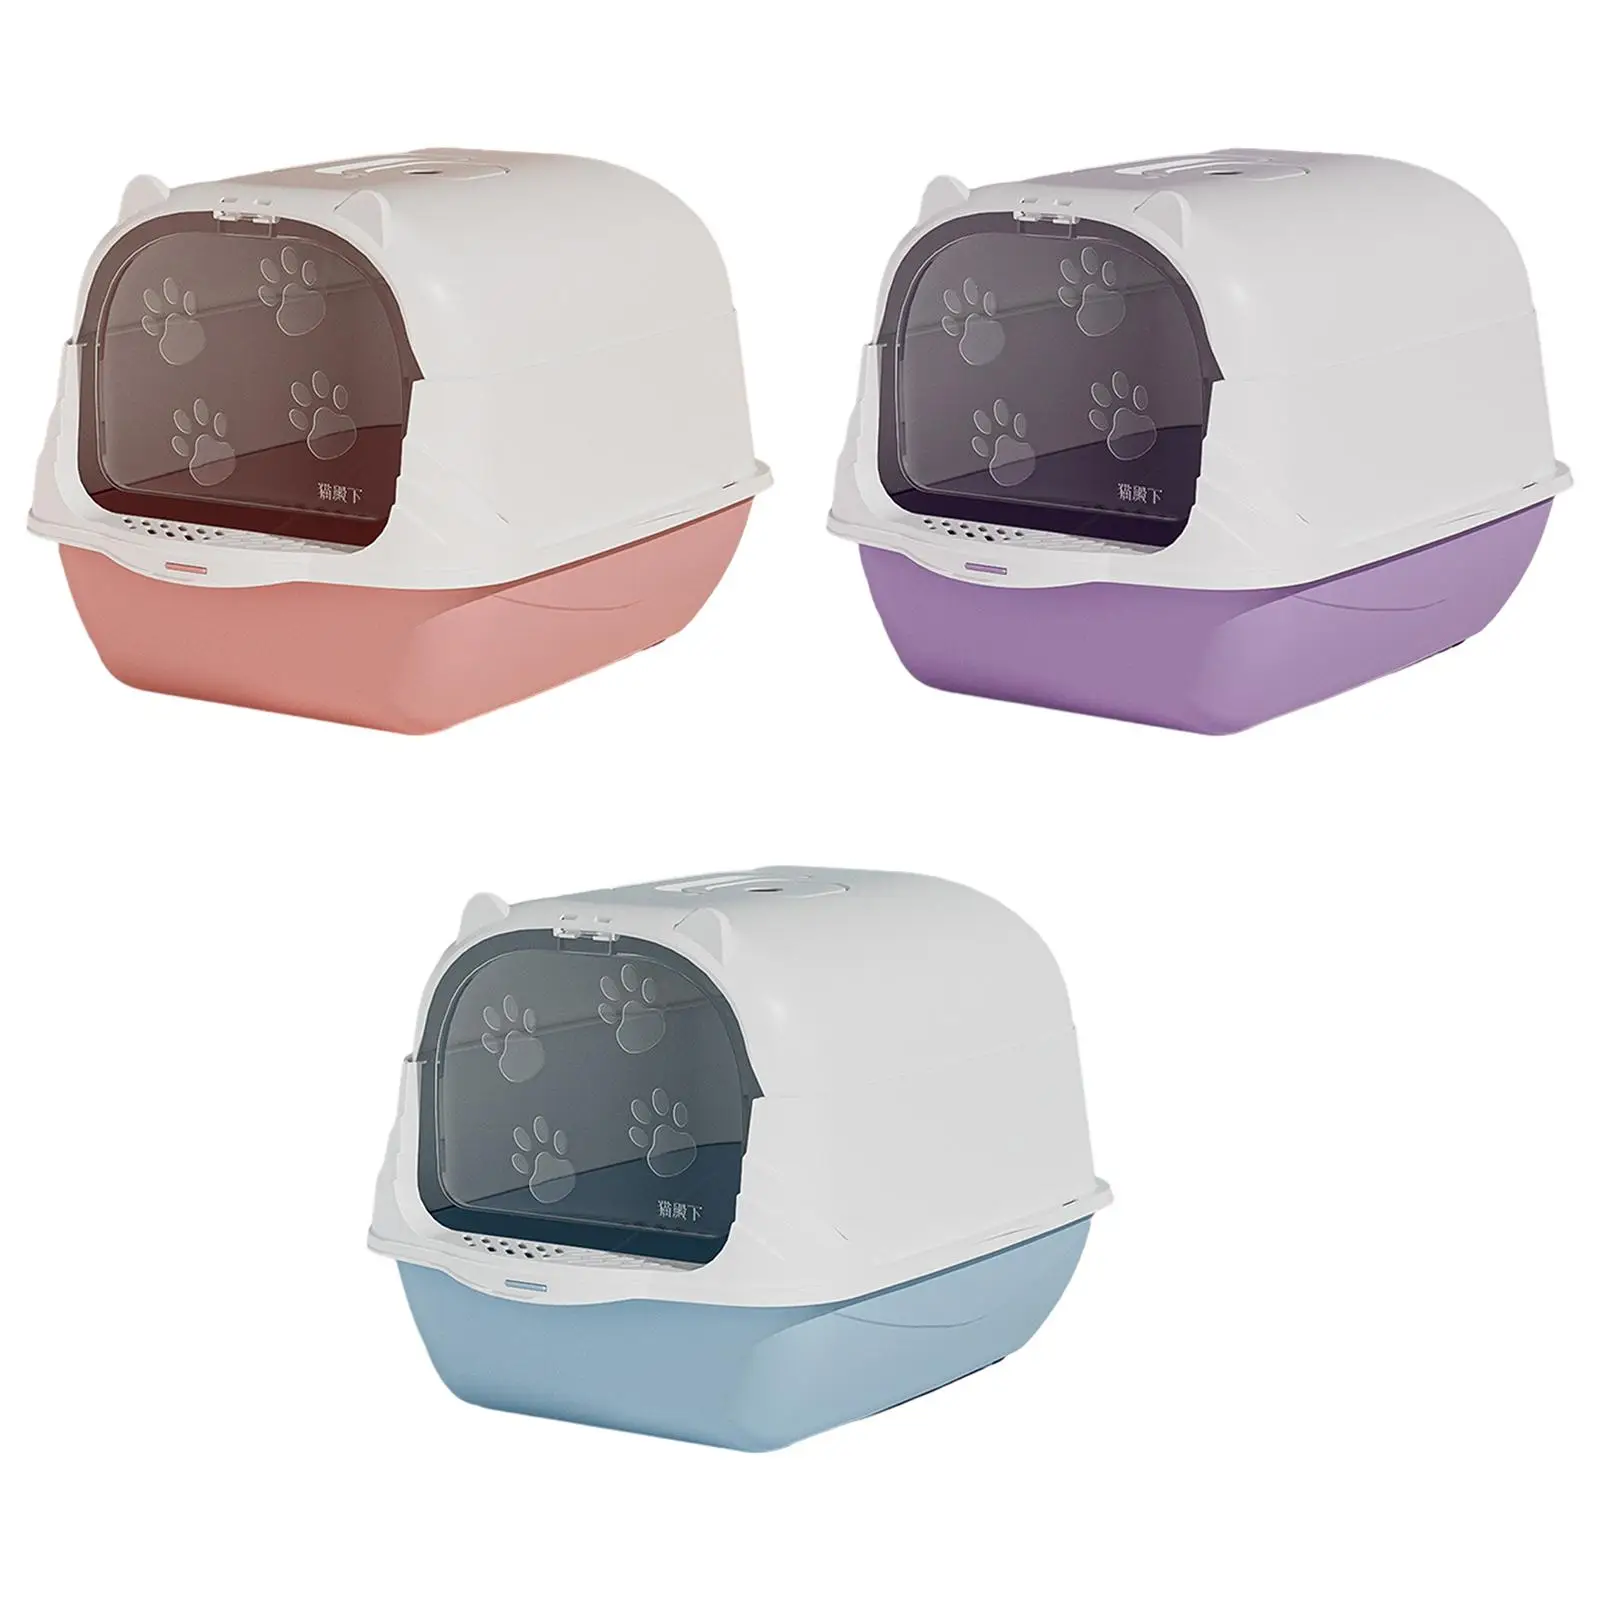 Hooded Cat Litter Box with Lid Enclosed Cat Toilet Kitty Litter Tray Portable with Front Door Flap Kitten Potty Pet Supplies